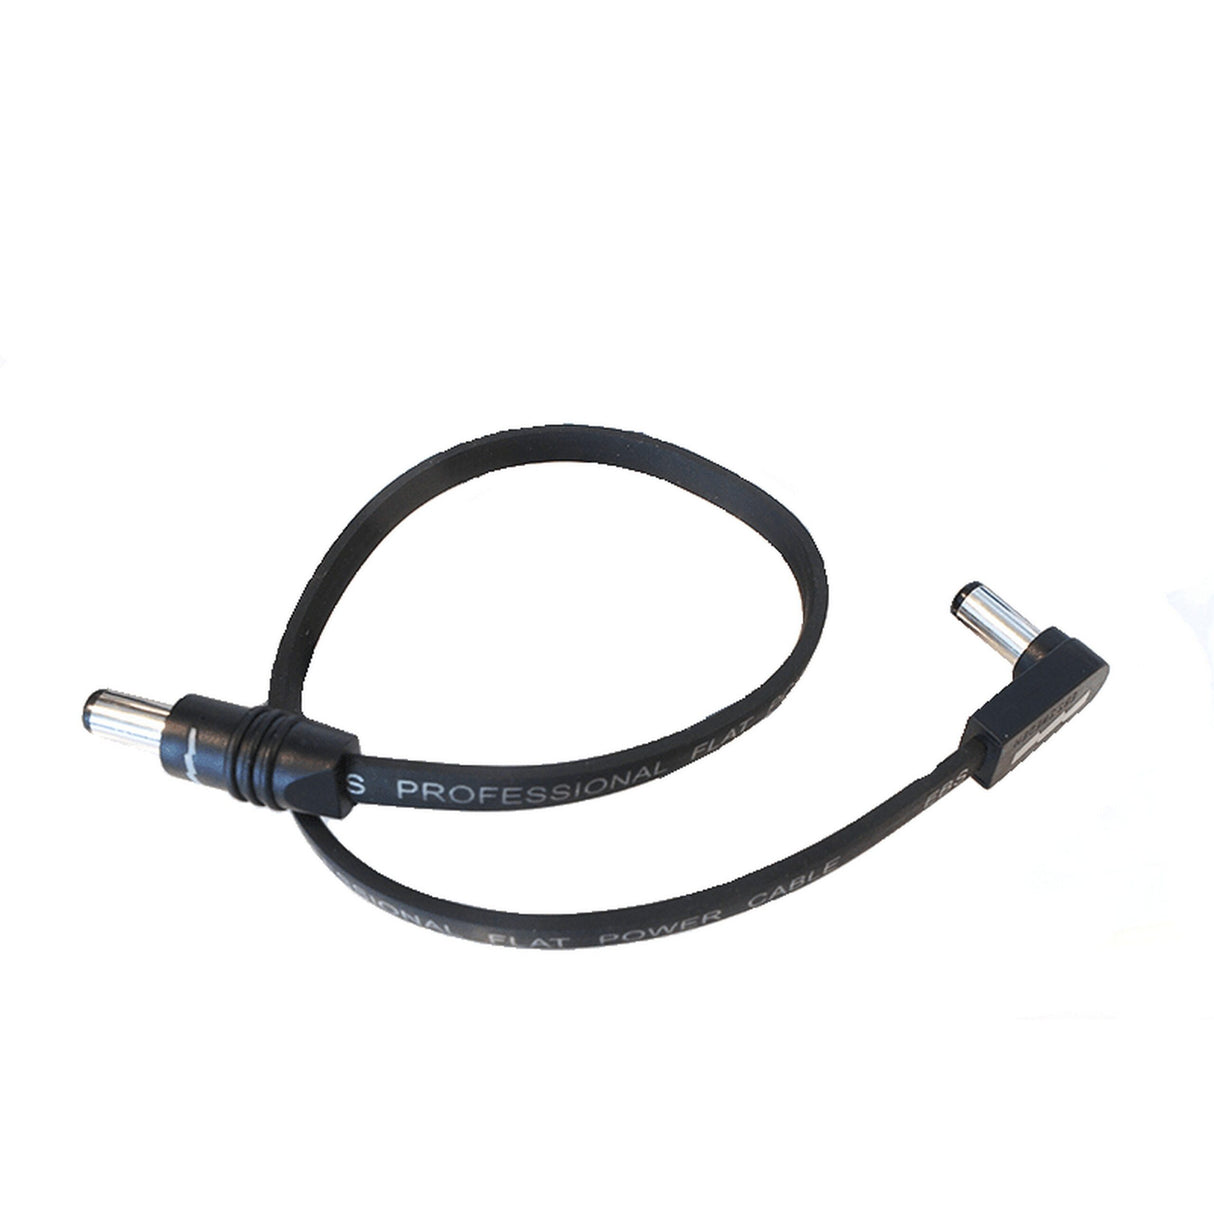 EBS DC1-18 90/0 Flat Power Cable, 18 Centimeters